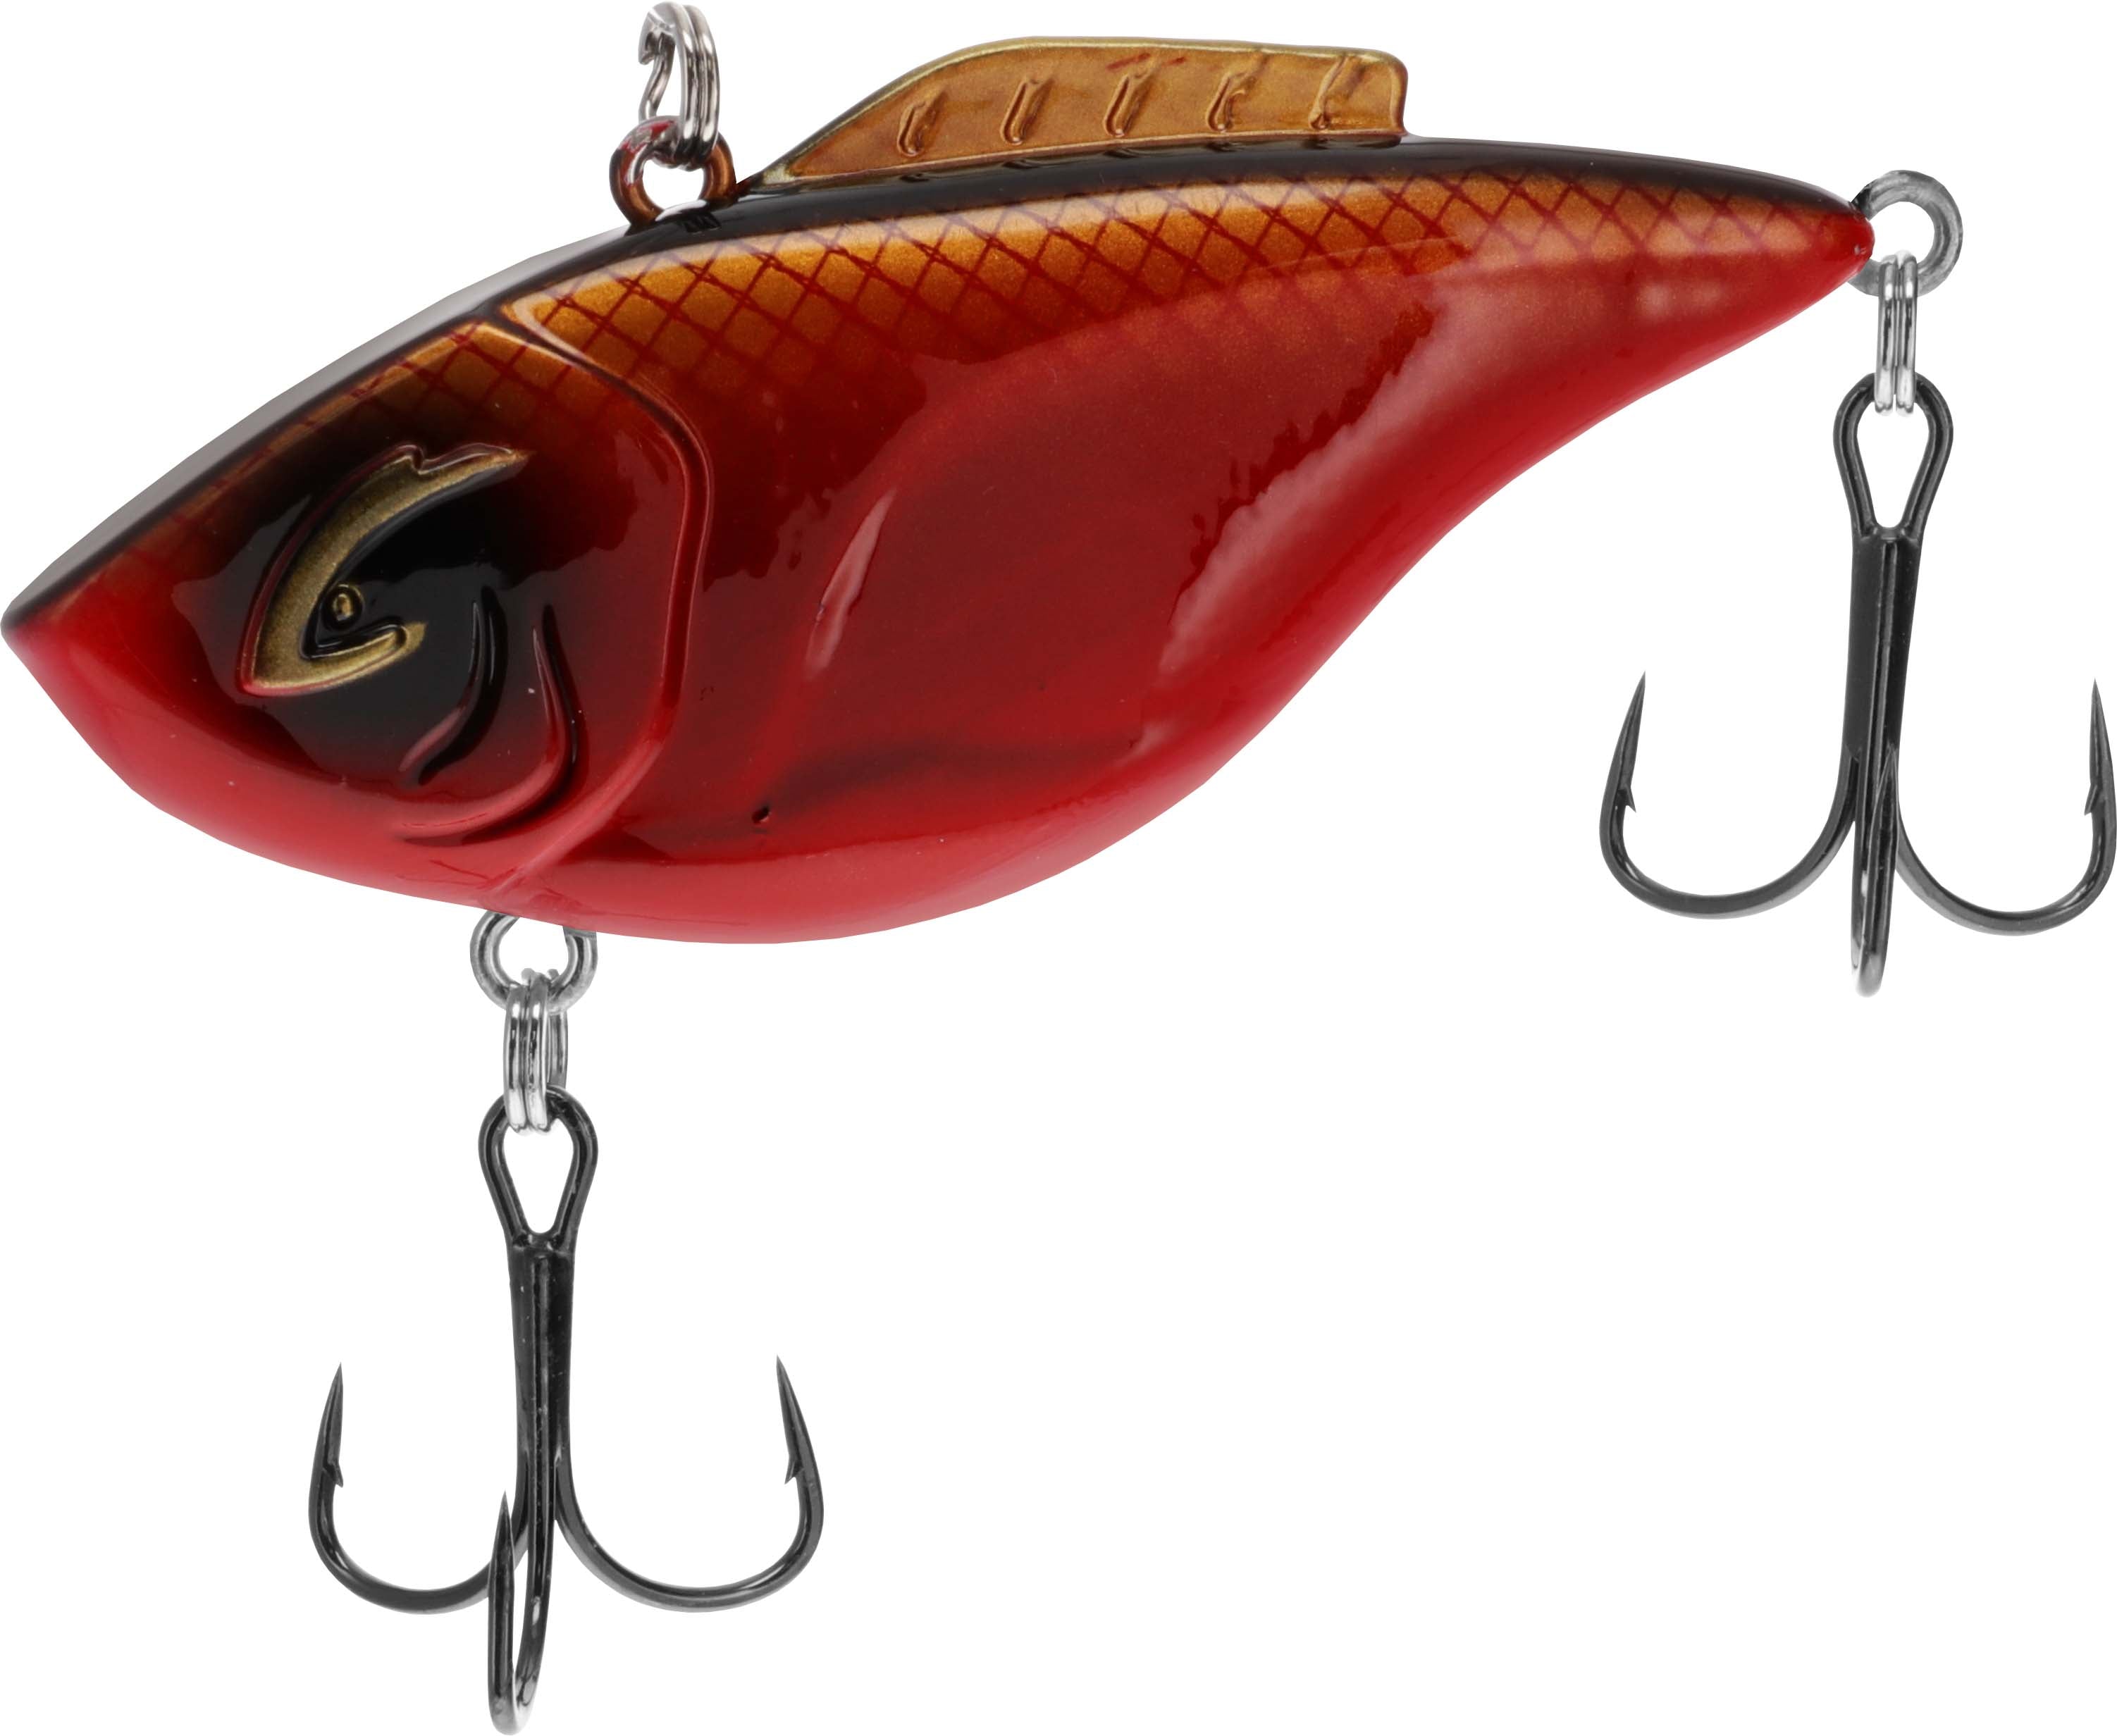 How to choose the best lipless crankbait